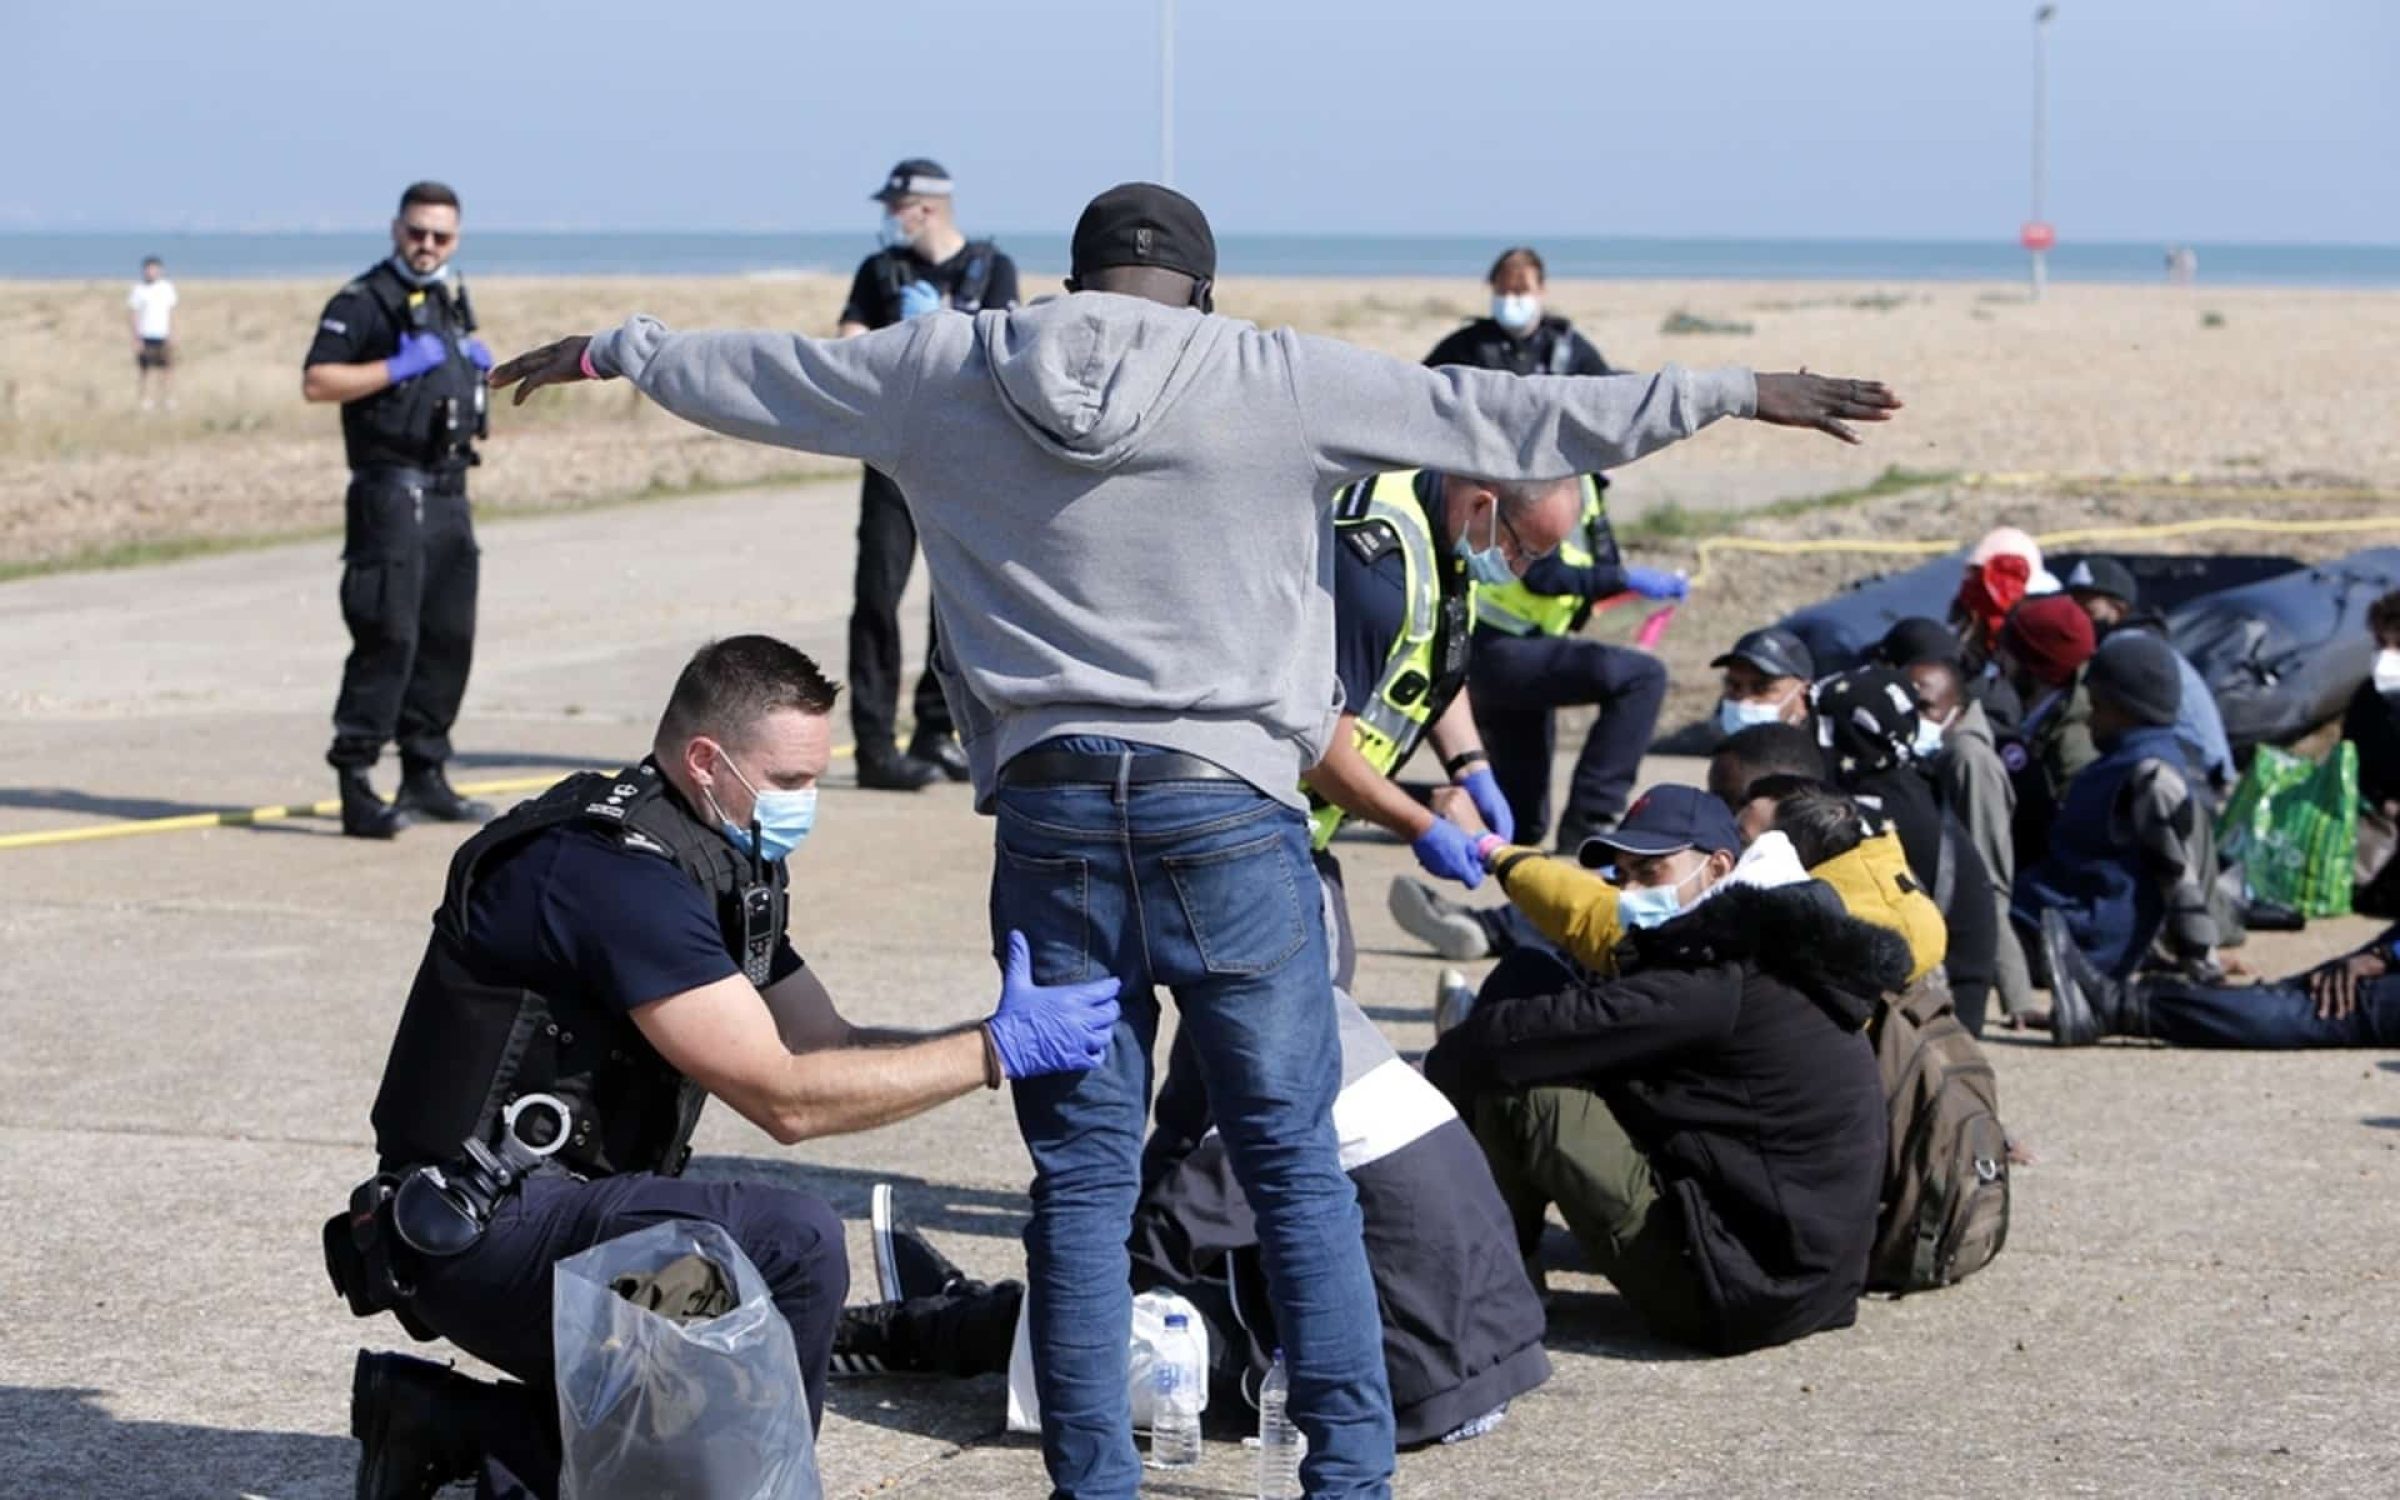 Dungeness, Kent, UK, May 6th 2022, Migrant being questioned and searched by Border Force officials on the beach at Dungeness after migrants crossed the English channel to the UK.